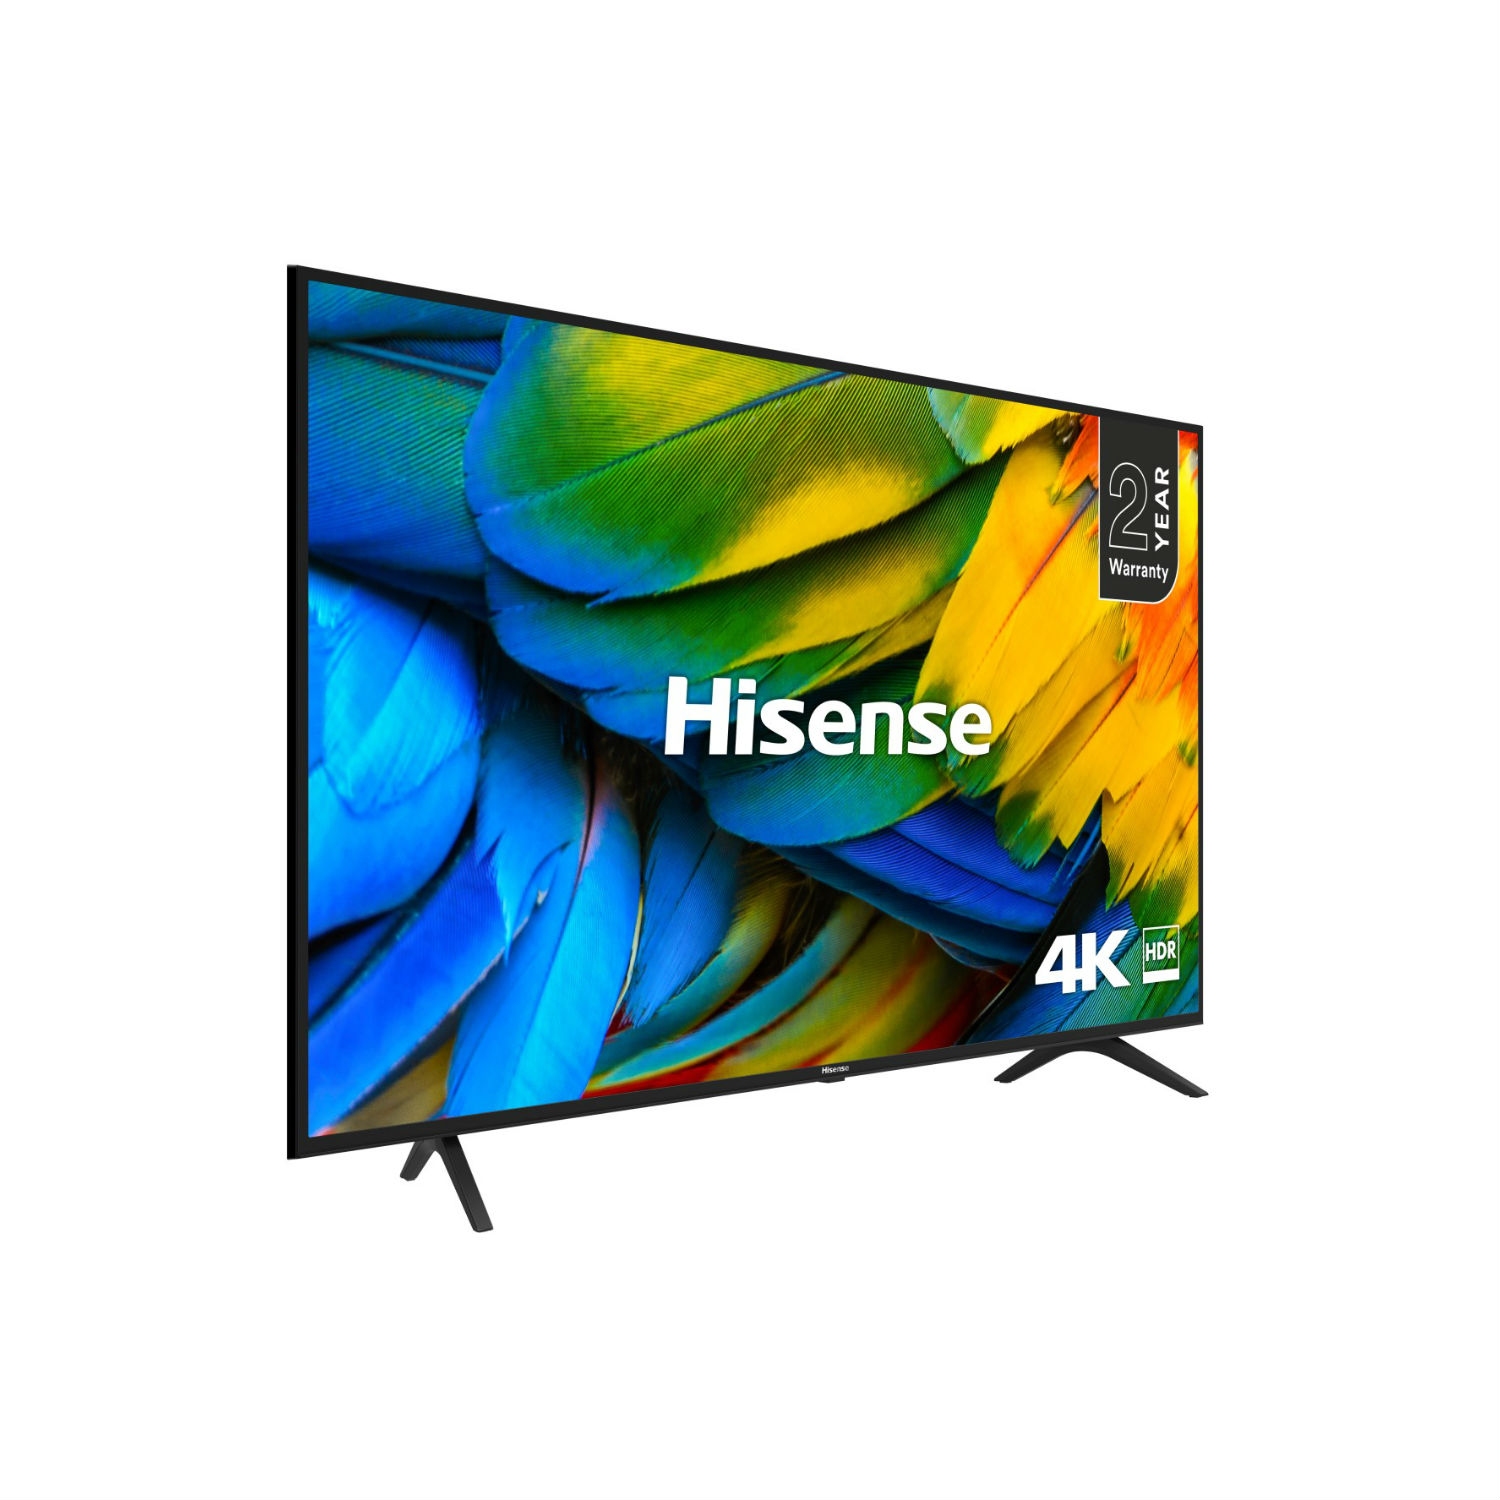 Hisense 55" 4K UHD HDR - SMART TV - Freeview - A+ Rated - 0